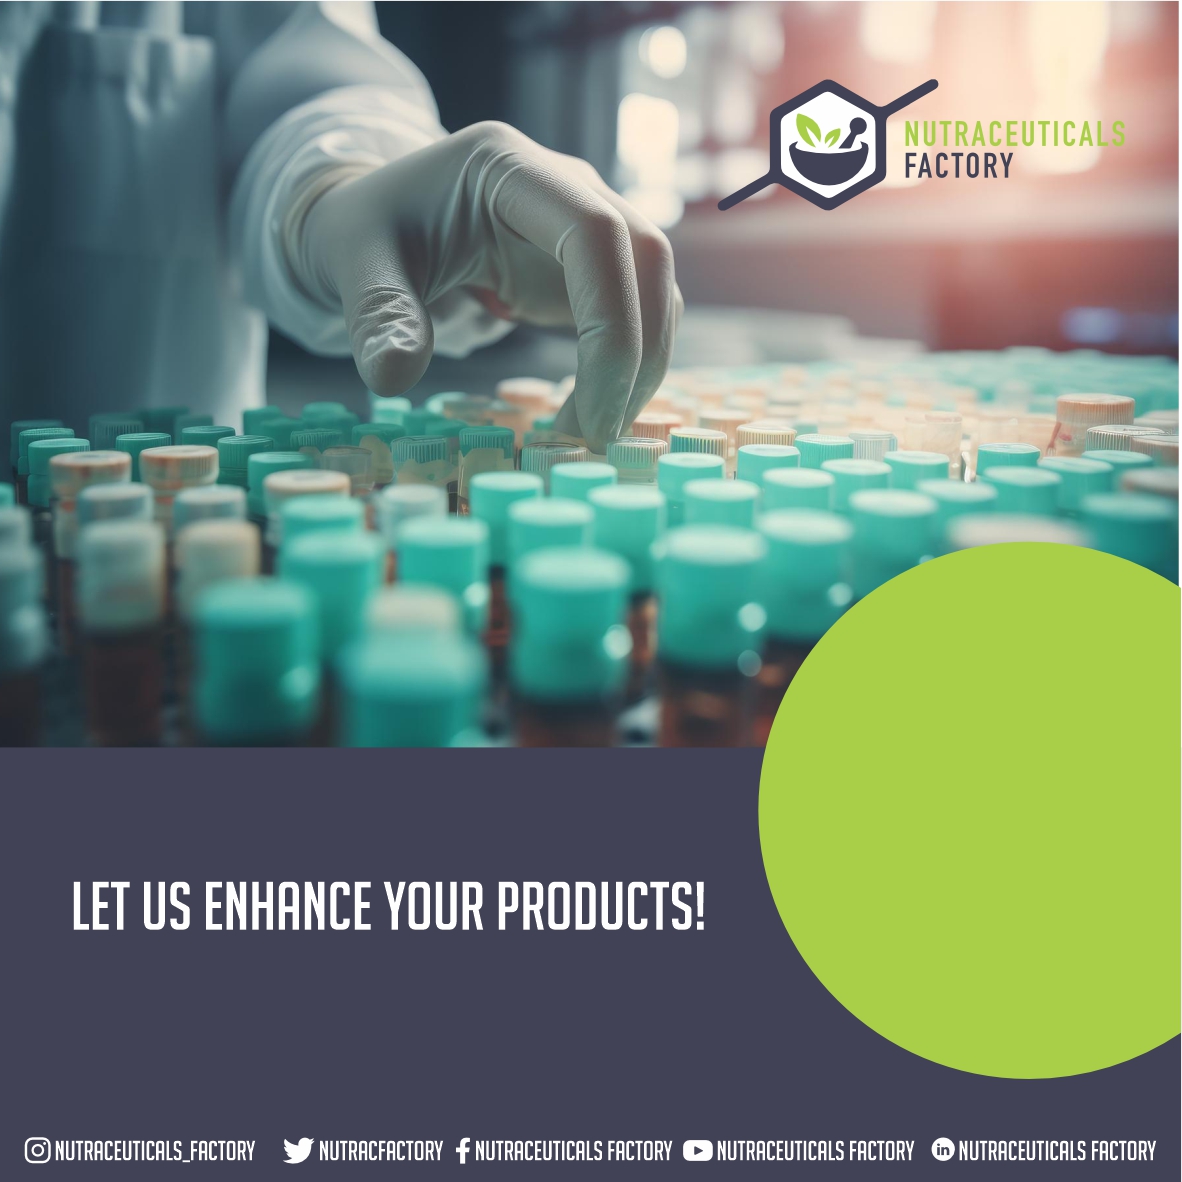 Do you want more information? Contact us by CALLING US: +1 727 692-7294 info@nutraceuticalsfactory.com

#NutraceuticalsFactory #Nutraceuticals #usa #florida #privatelabeling #productdevelopment #manufacturing #privatelabelnutraceuticals #nutraceuticalsupplement #manufacturer